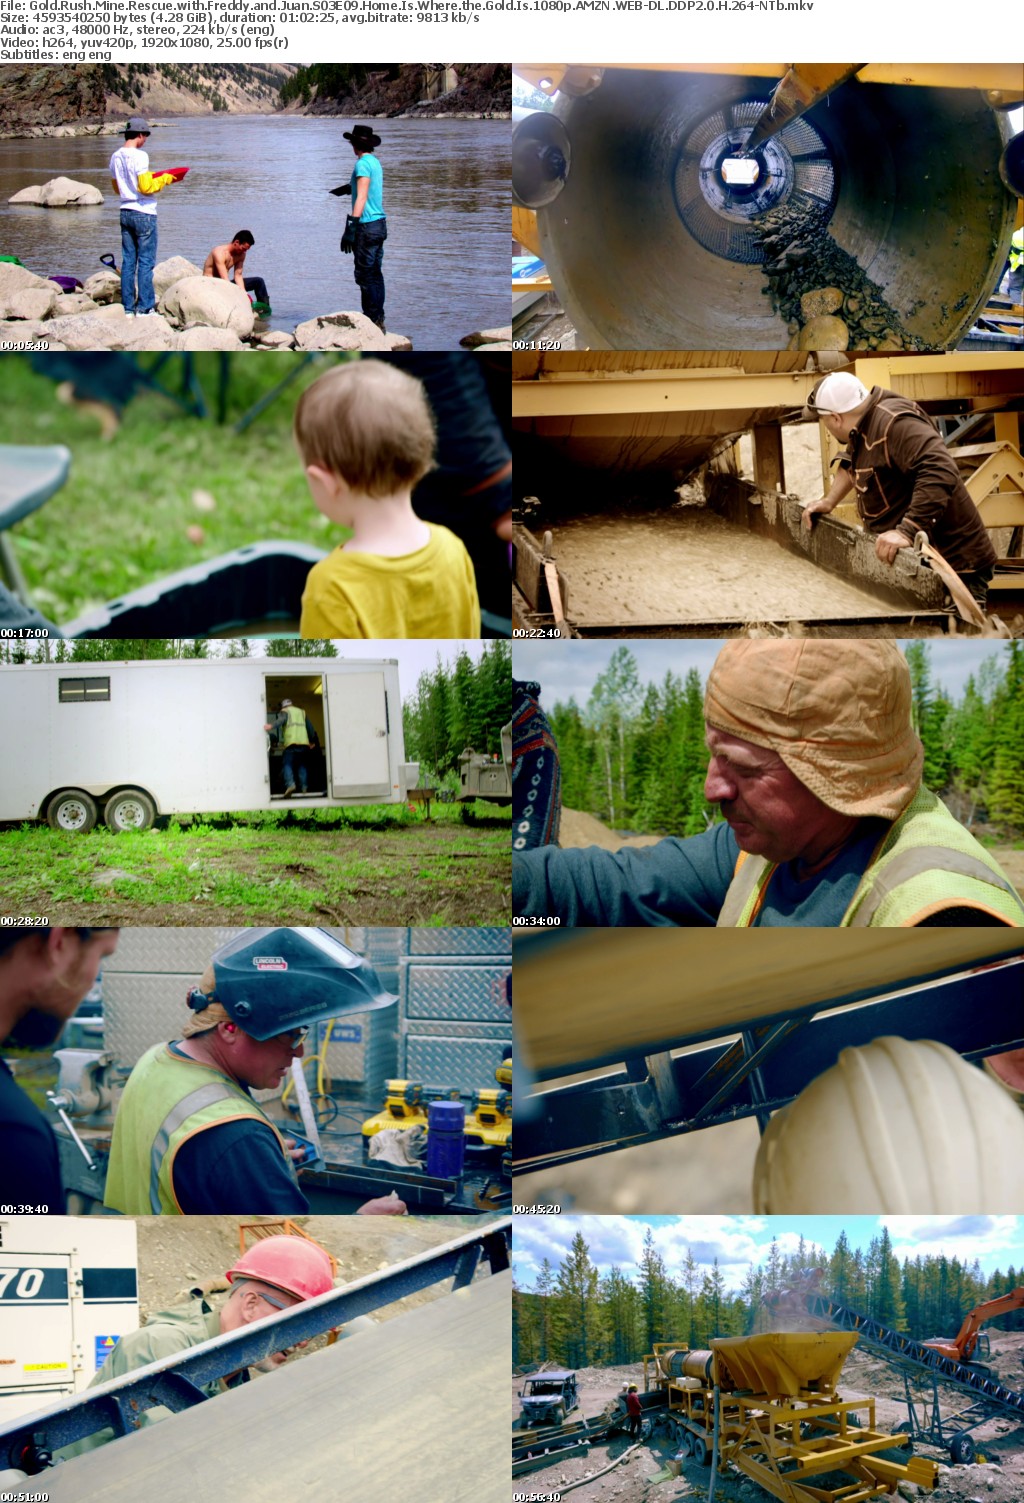 Gold Rush Mine Rescue with Freddy and Juan S03E09 Home Is Where the Gold Is 1080p AMZN WEB-DL DDP2 0 H 264-NTb